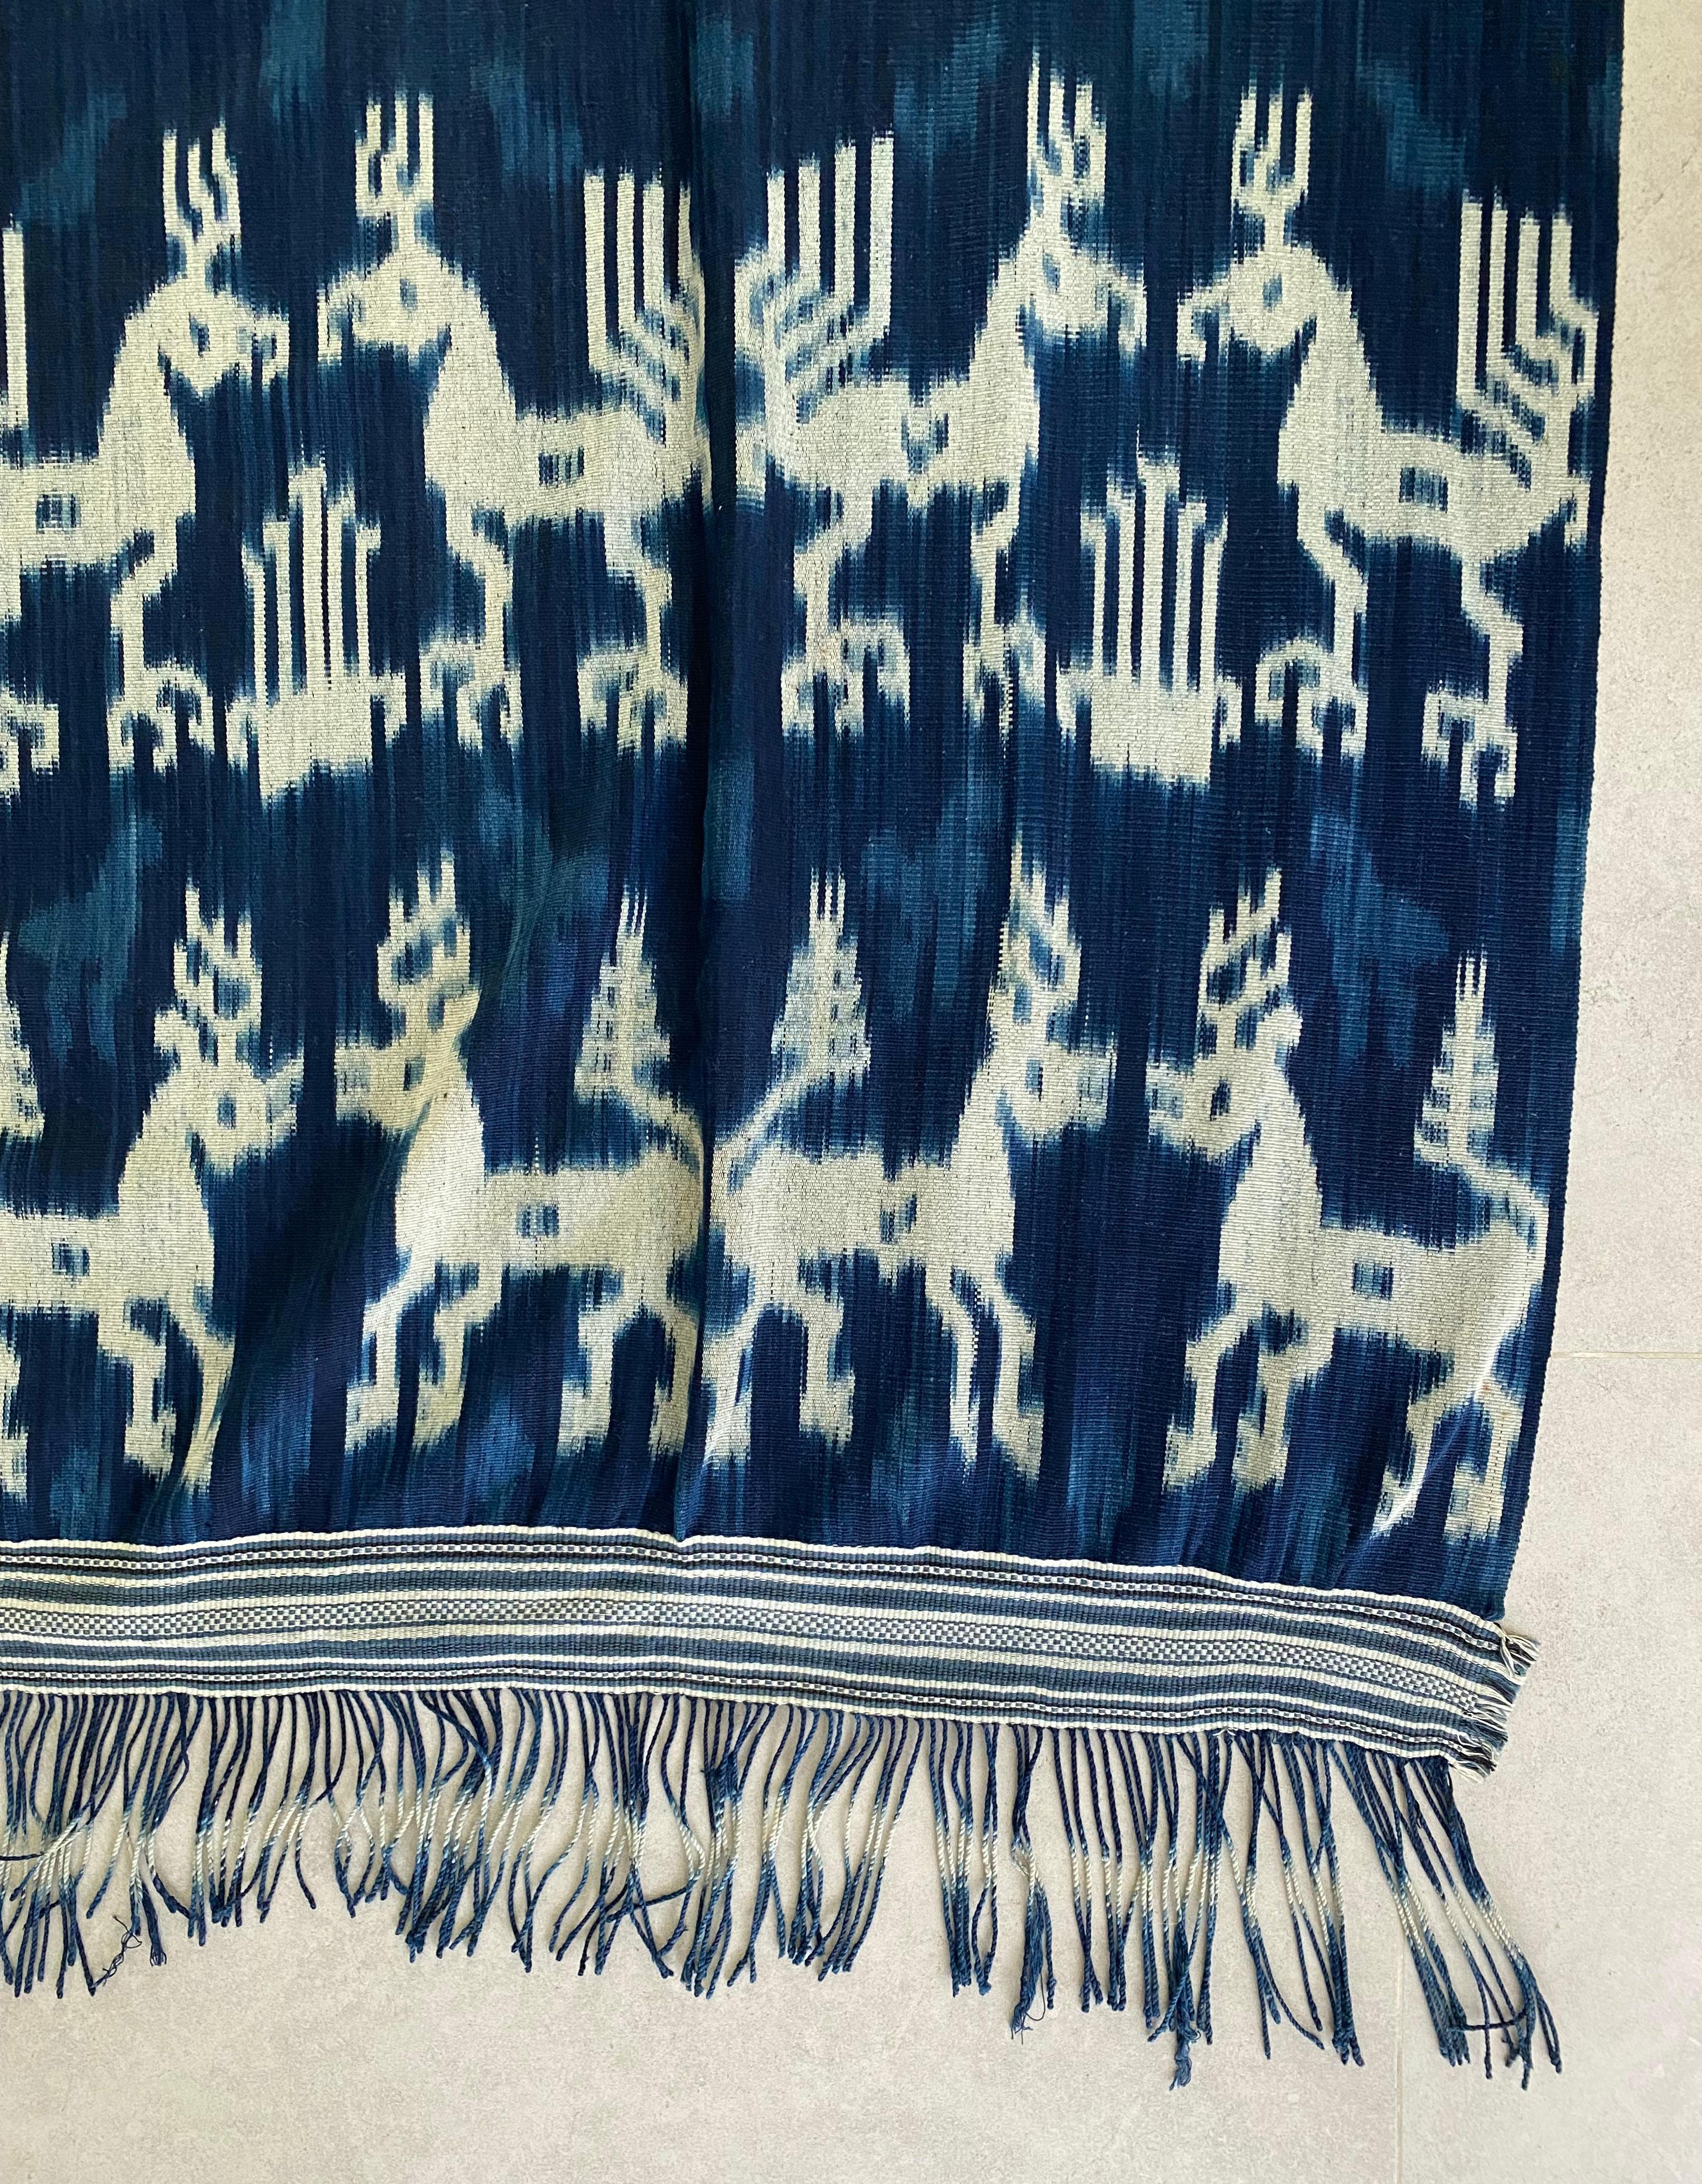 Hand-Woven Ikat Textile from Sumba Island, Indonesia